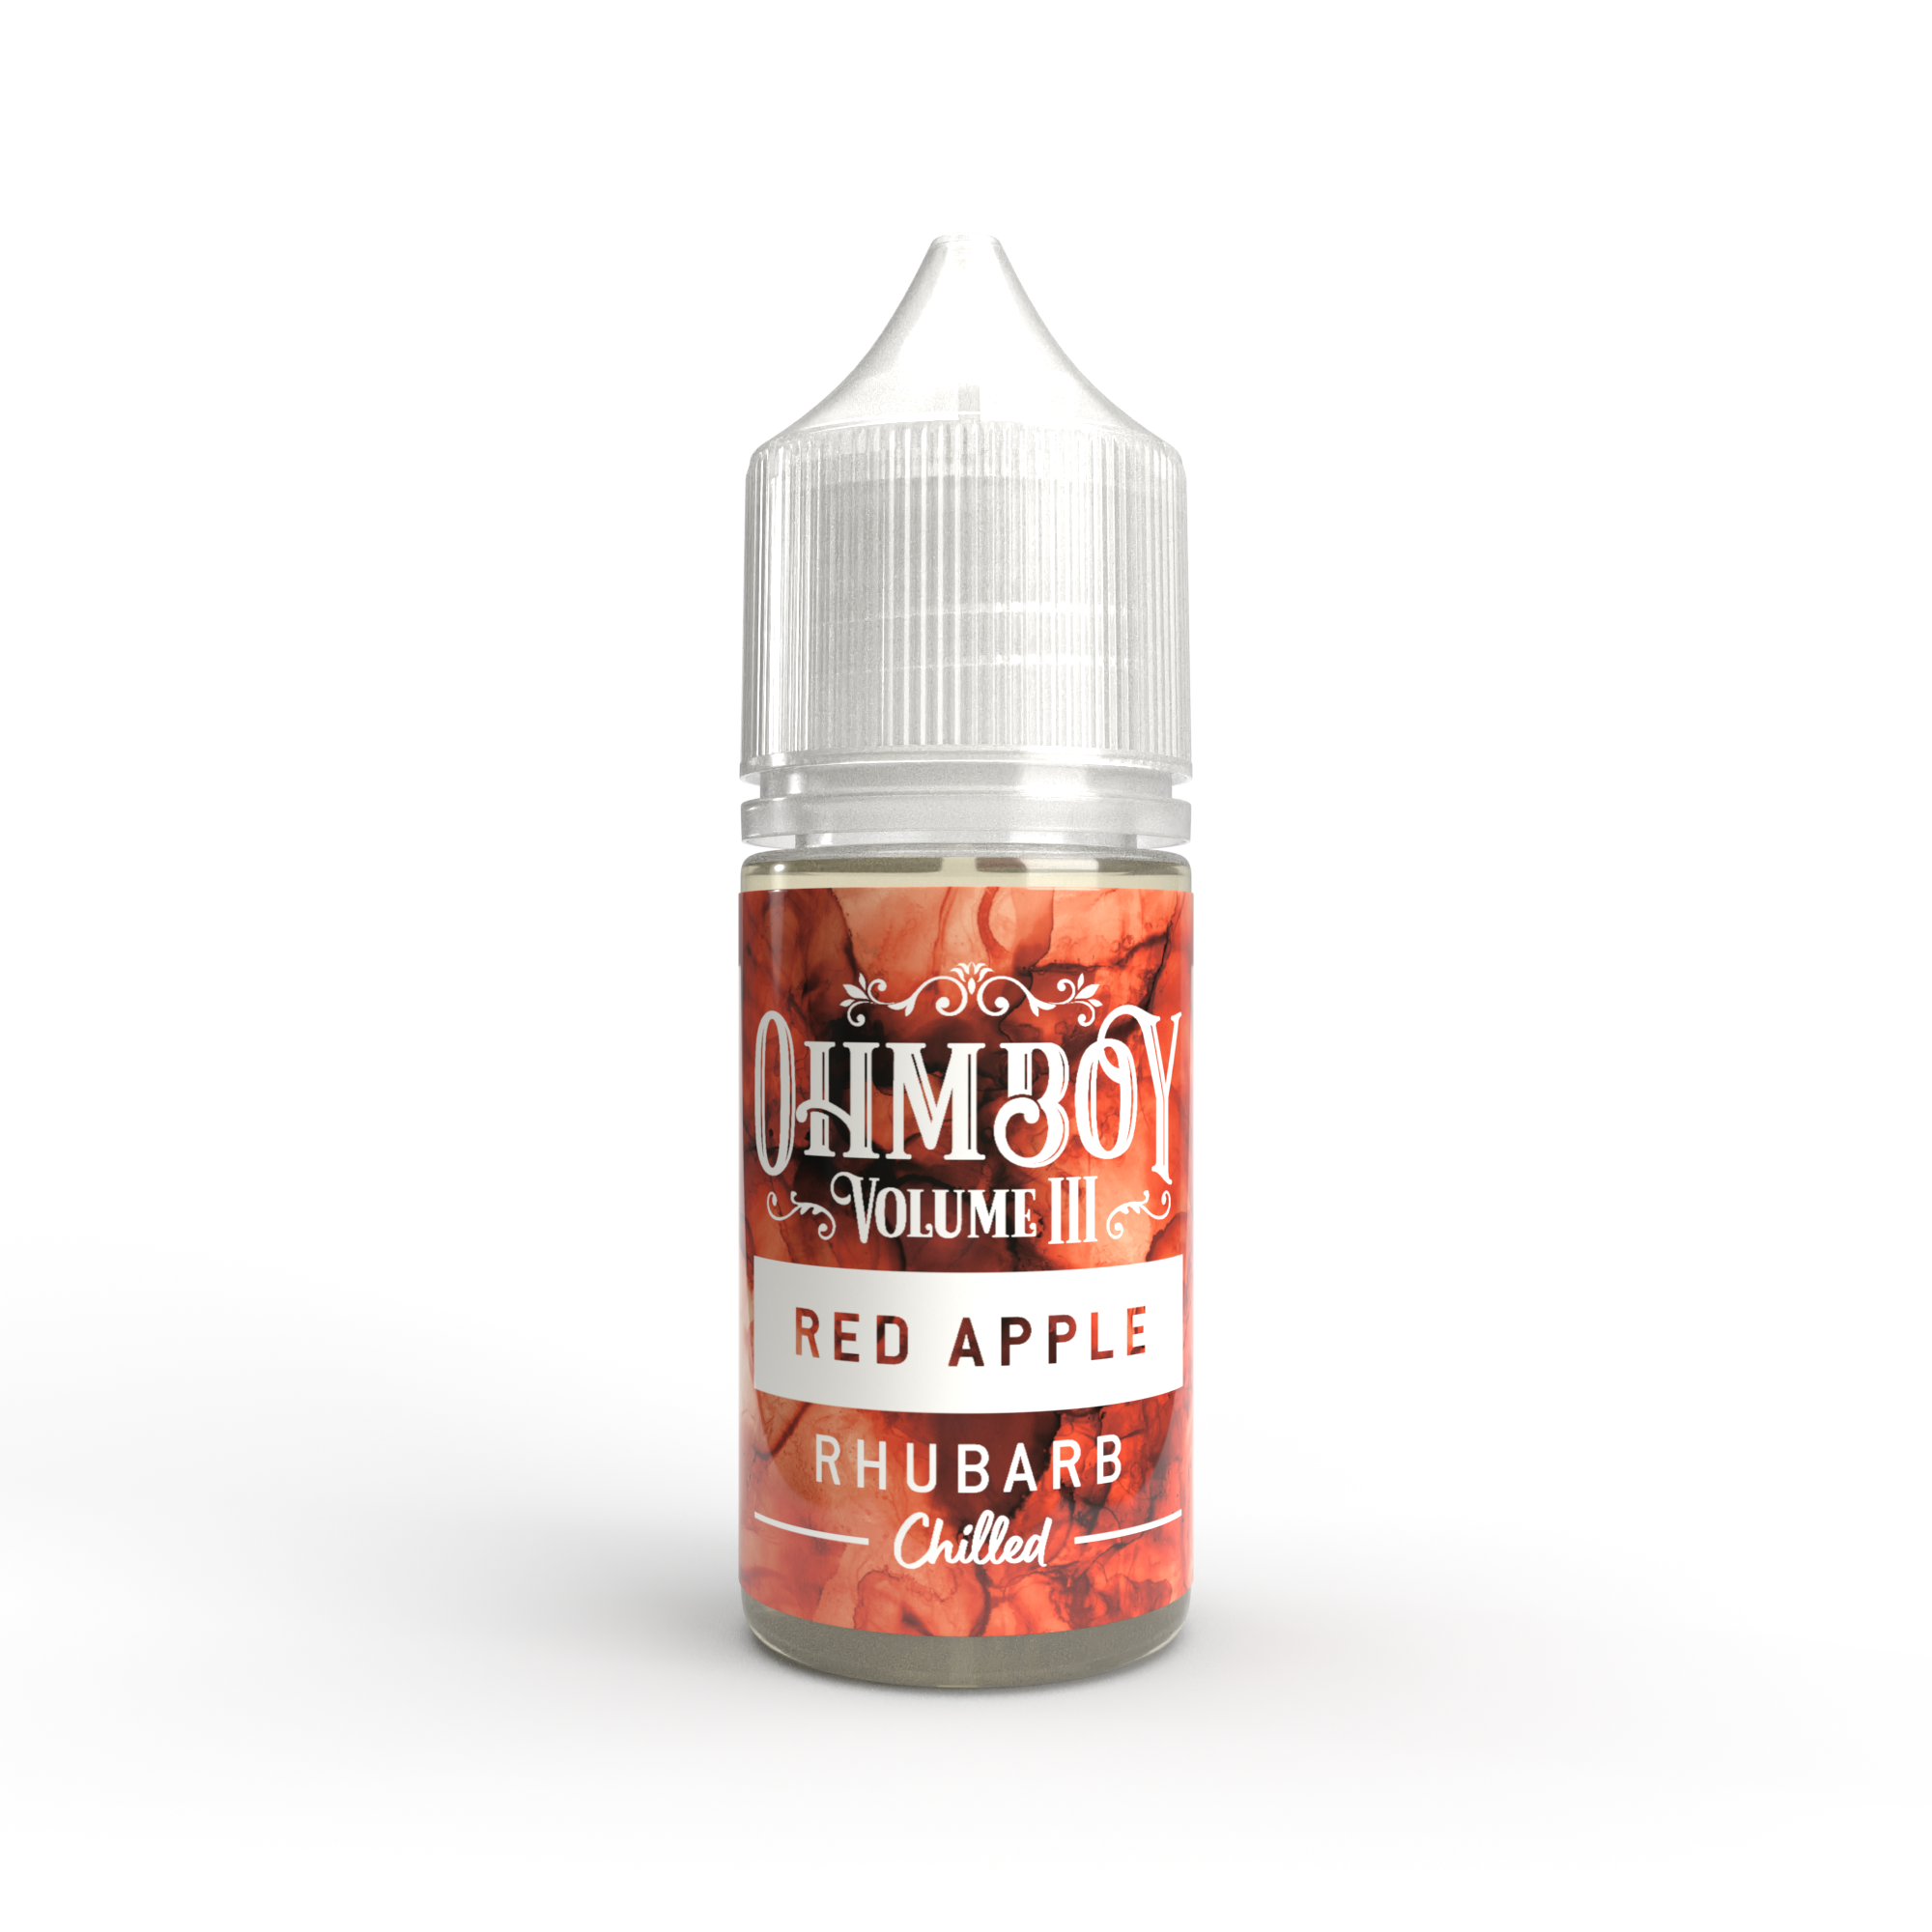 Red Apple Rhubarb Chilled Flavour Concentrate by Ohm Boy